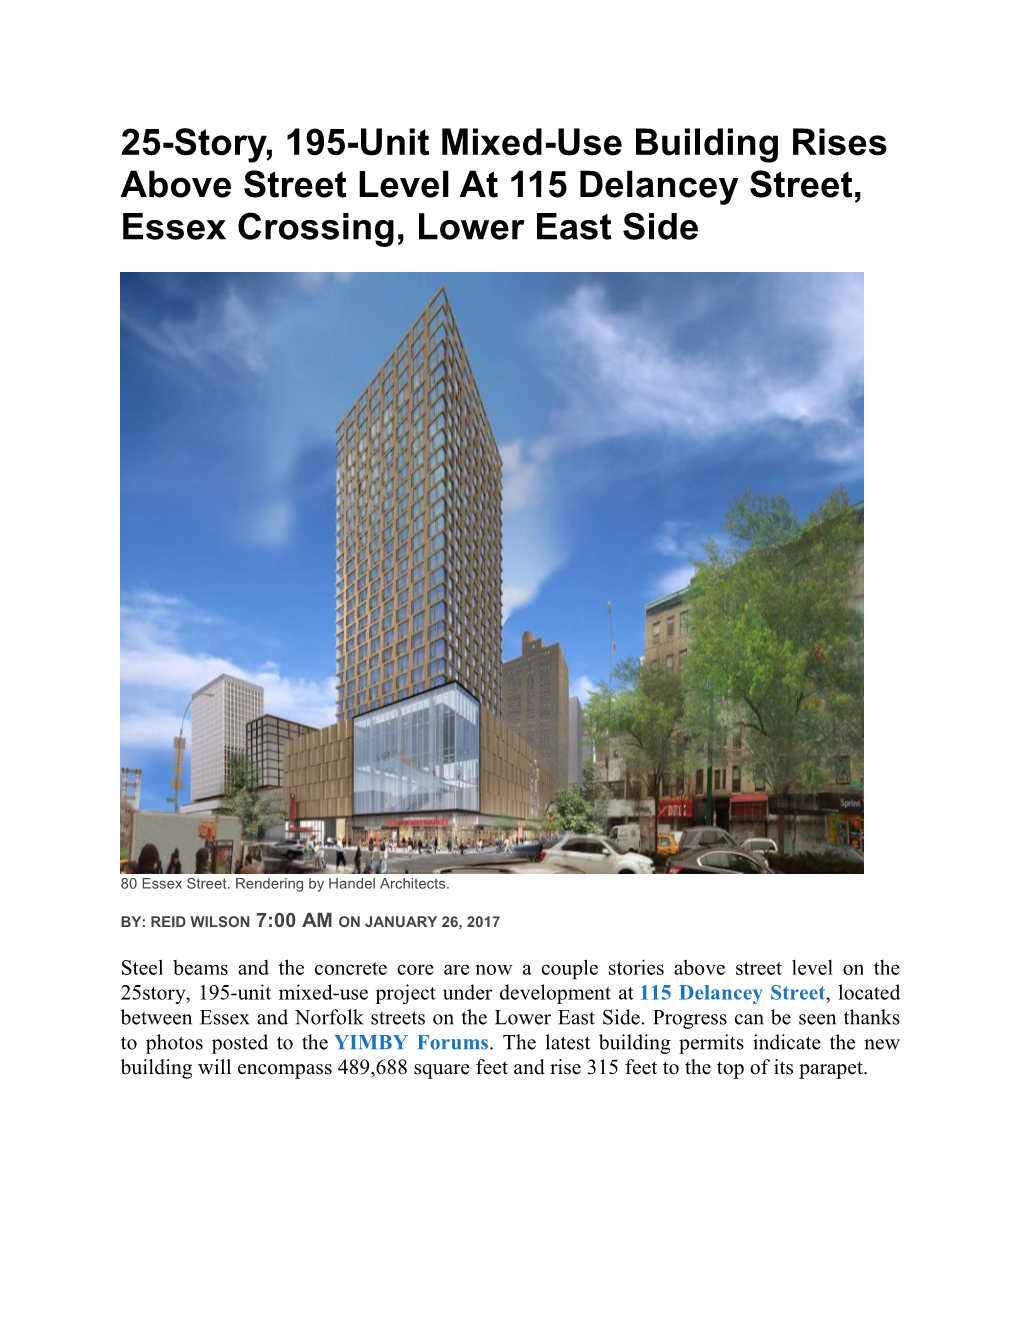 25-Story, 195-Unit Mixed-Use Building Rises Above Street Level at 115 Delancey Street, Essex Crossing, Lower East Side